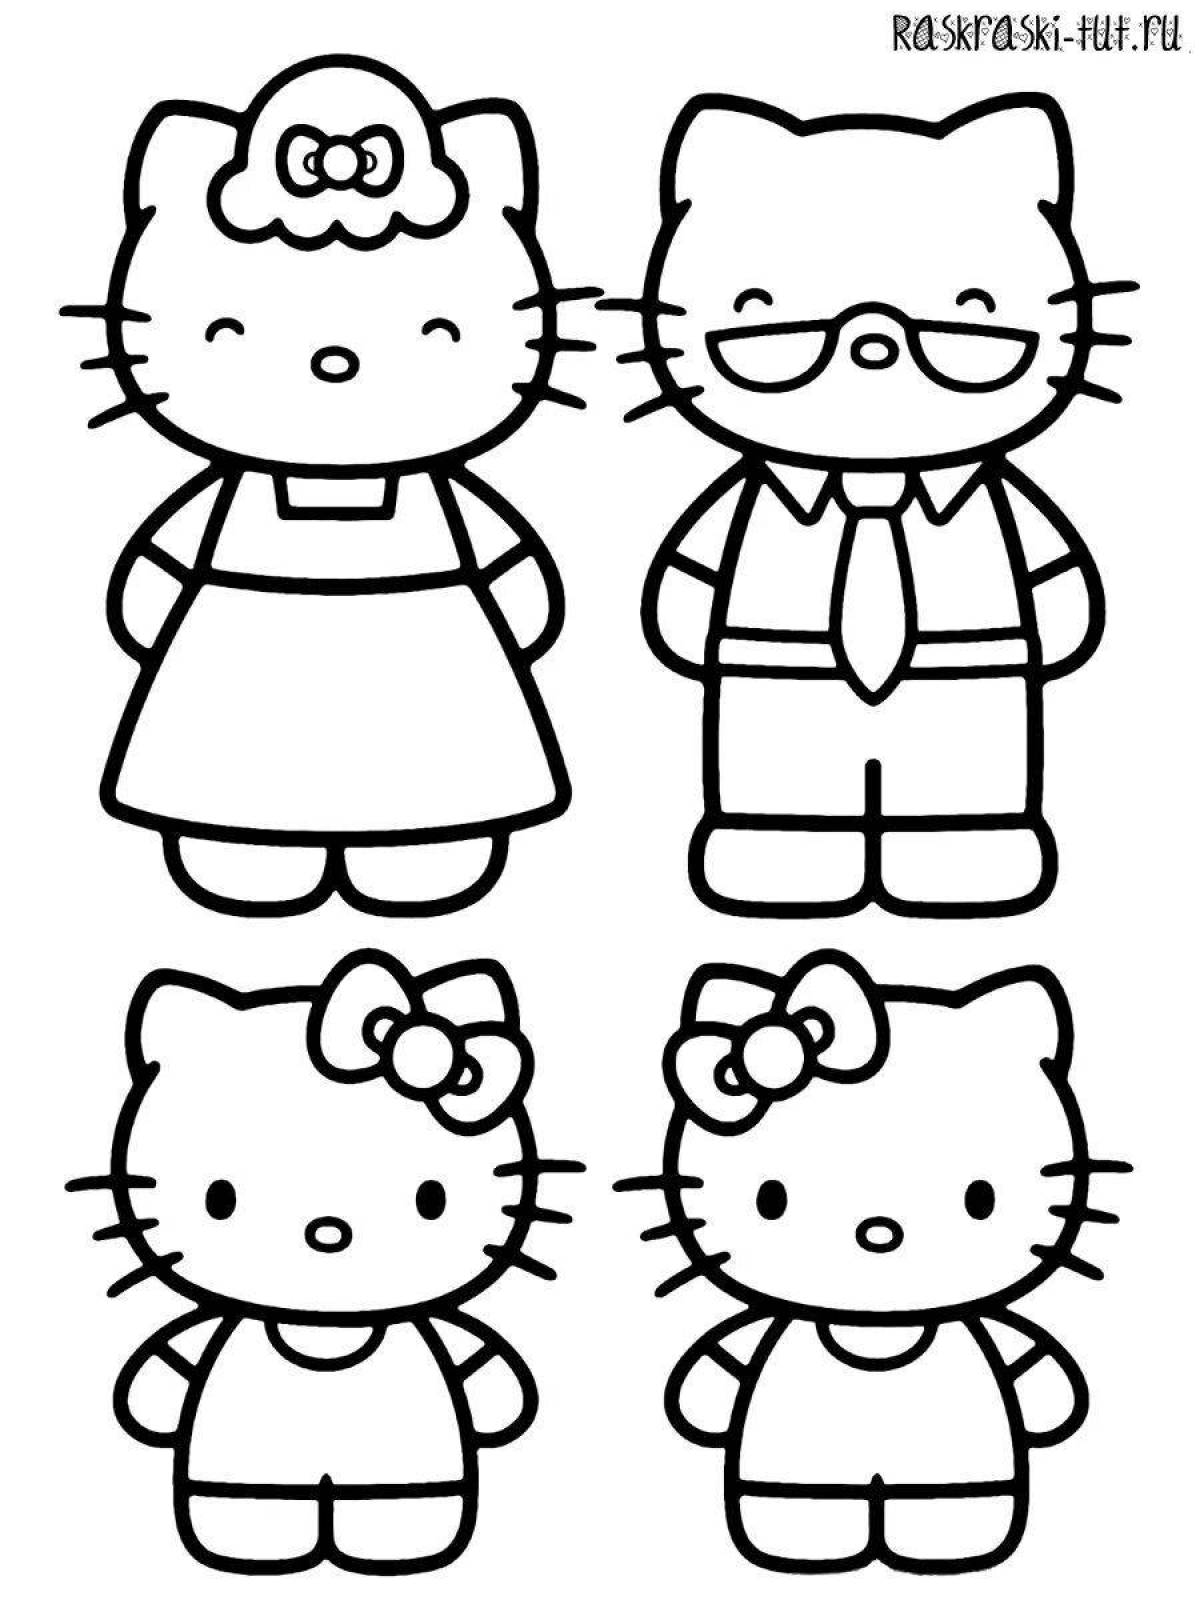 Little hello kitty coloring book